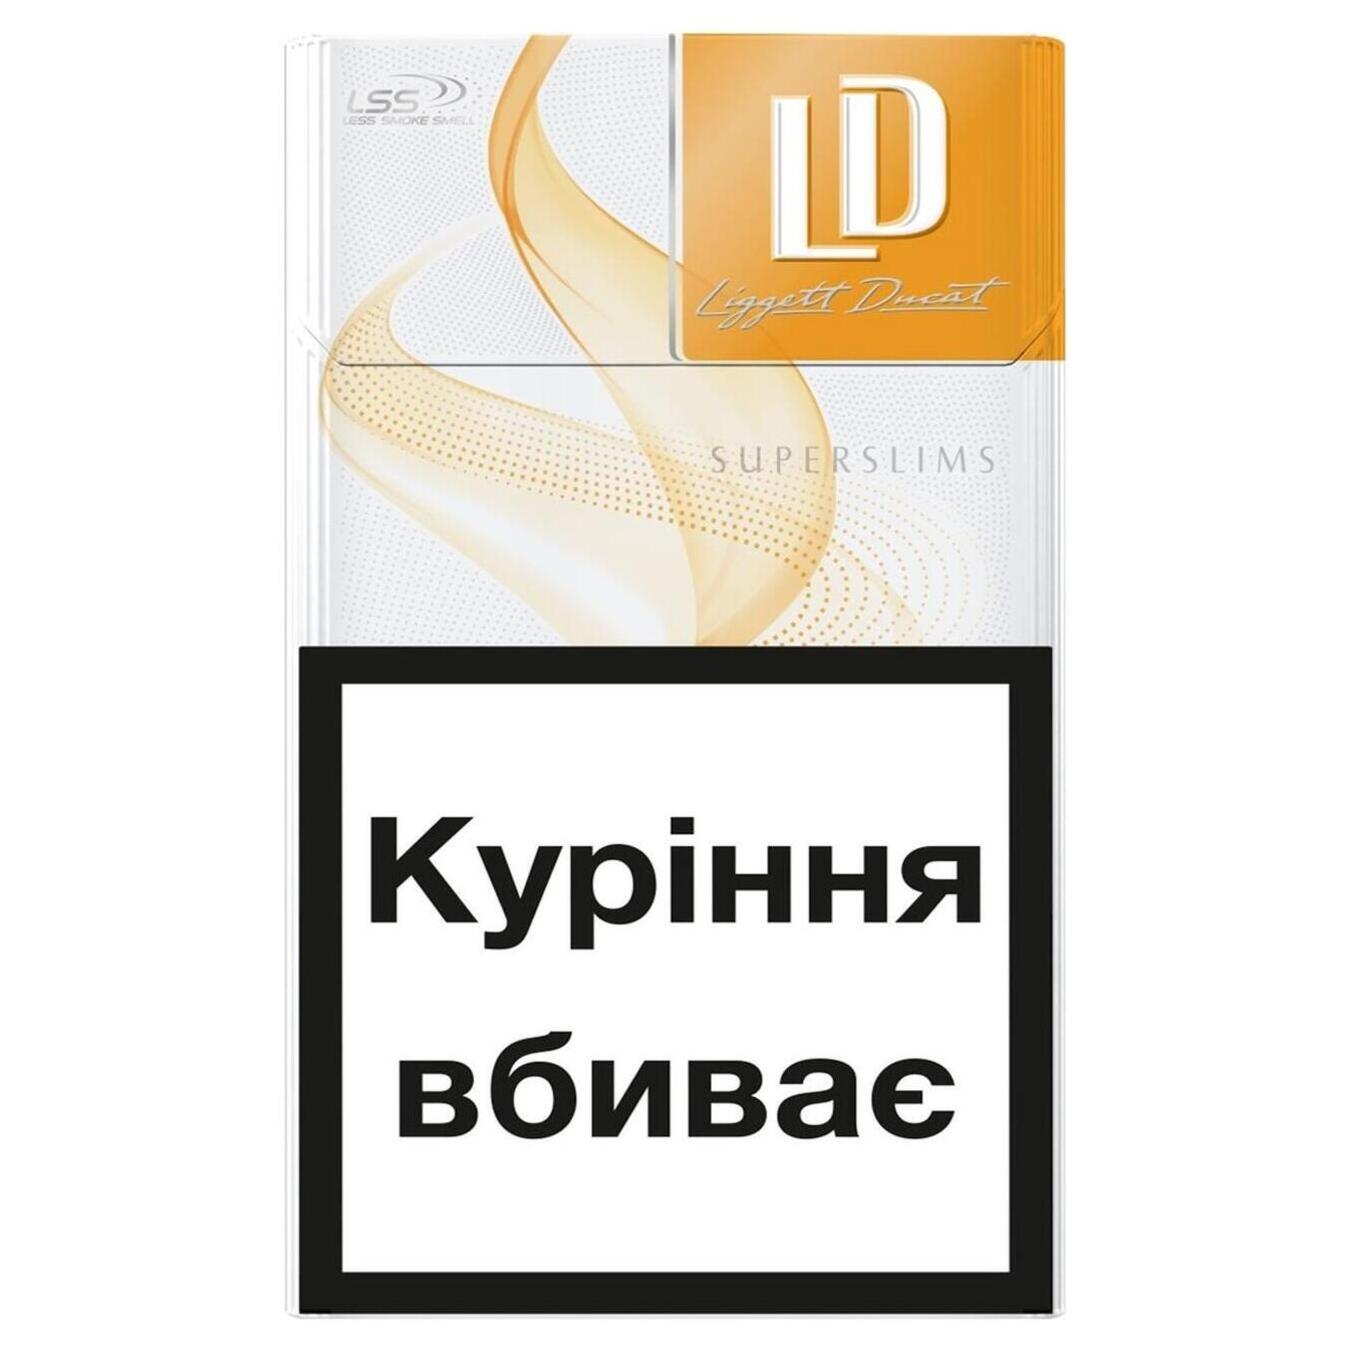 LD Super Slims Amber Cigarettes (the price is indicated without excise tax)